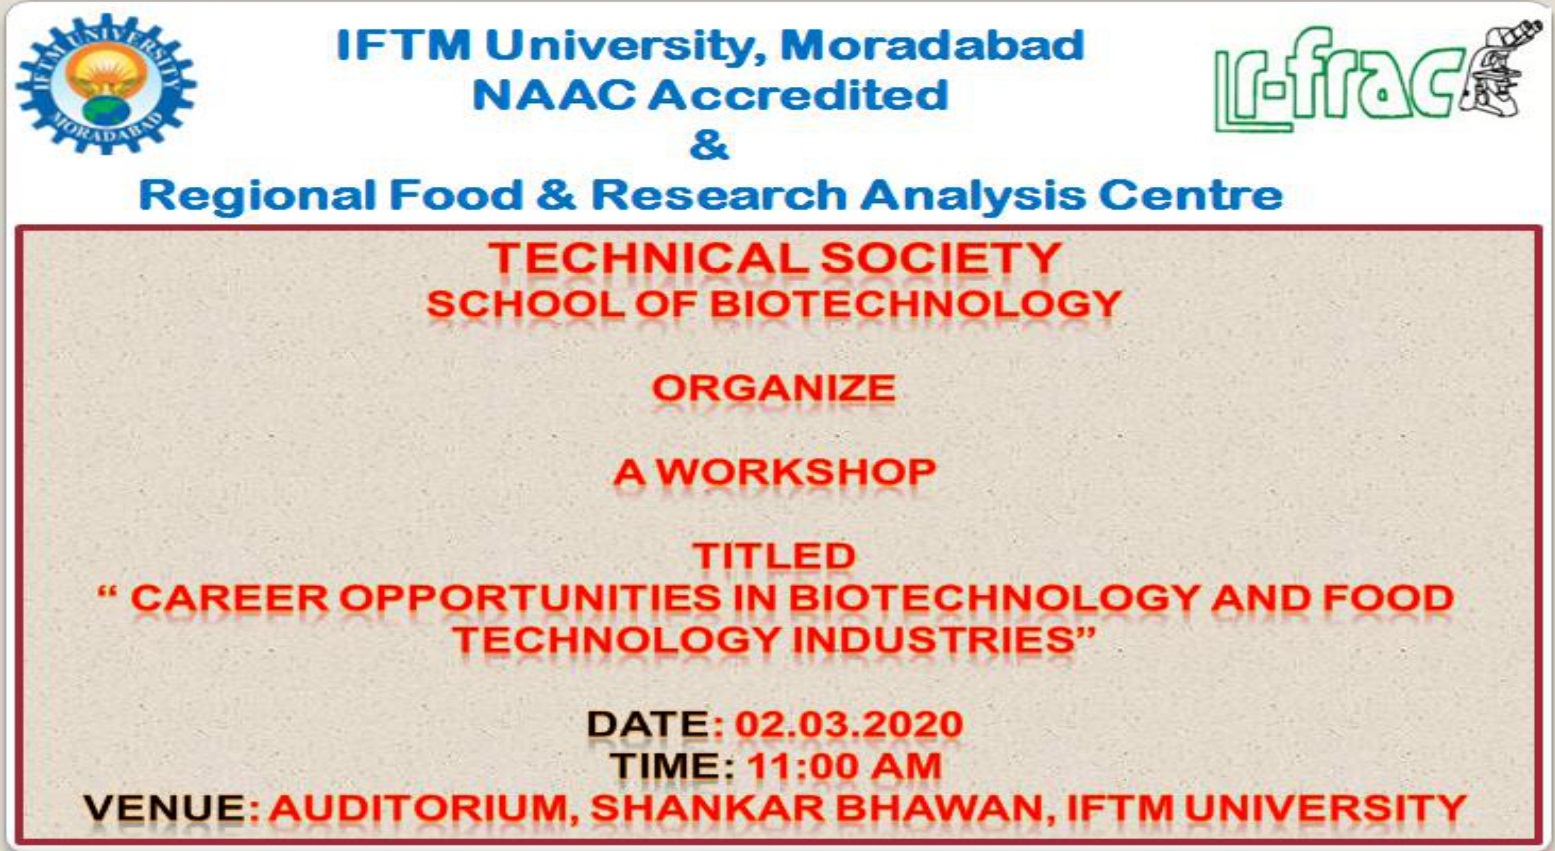 A workshop on Career Opportunities in Biotechnology & Food Technology Industries.